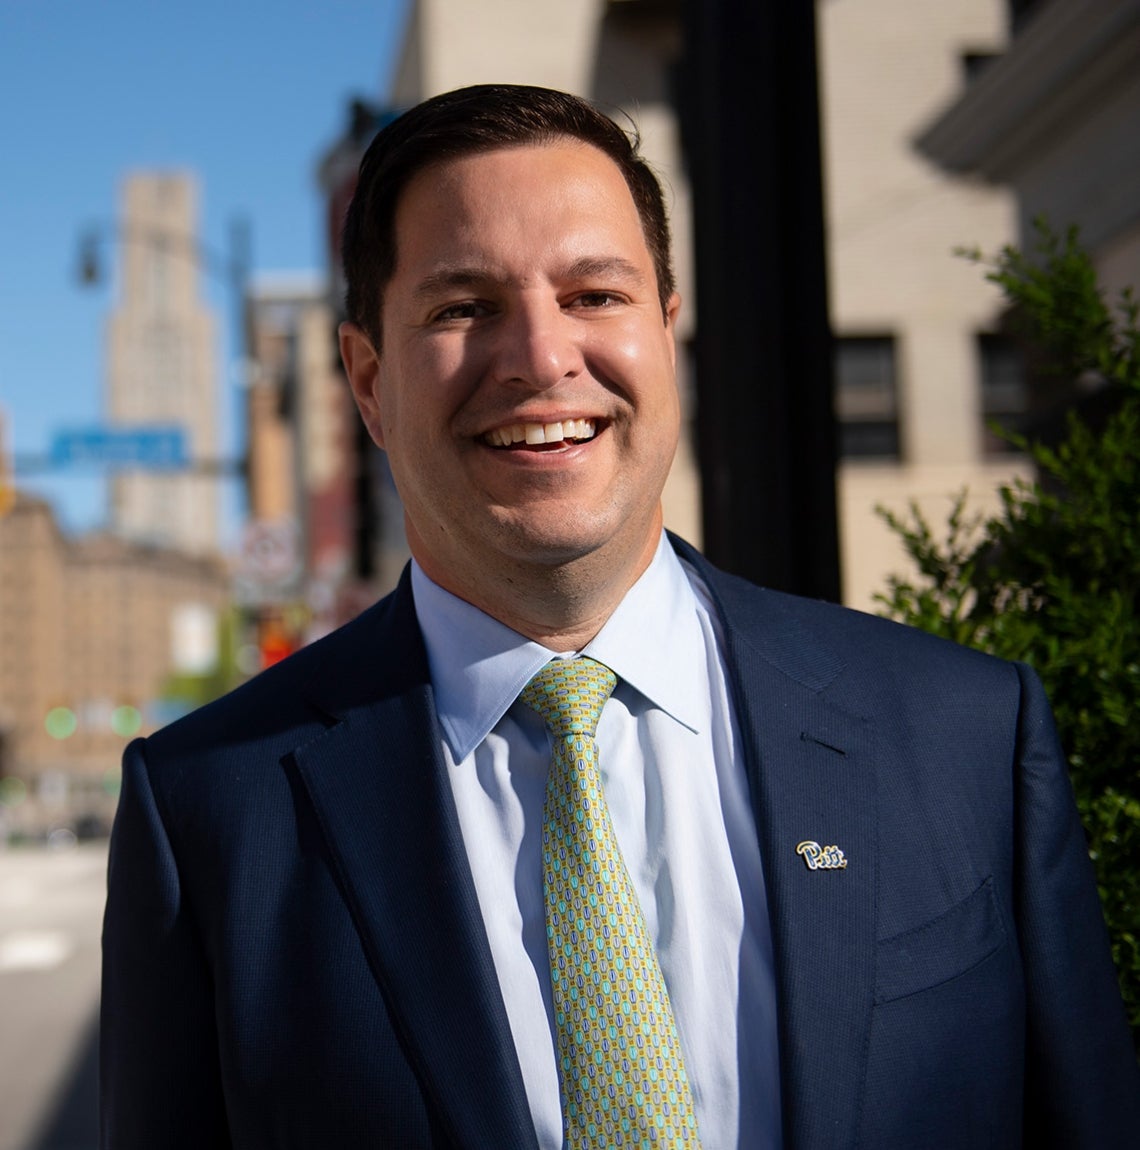 Main with dark hair, navy blue suit, light green tie and script Pitt pin on lapel stands sidewalk in Oakland, with Forbes Ave. and the Cathedral of learning visible in background